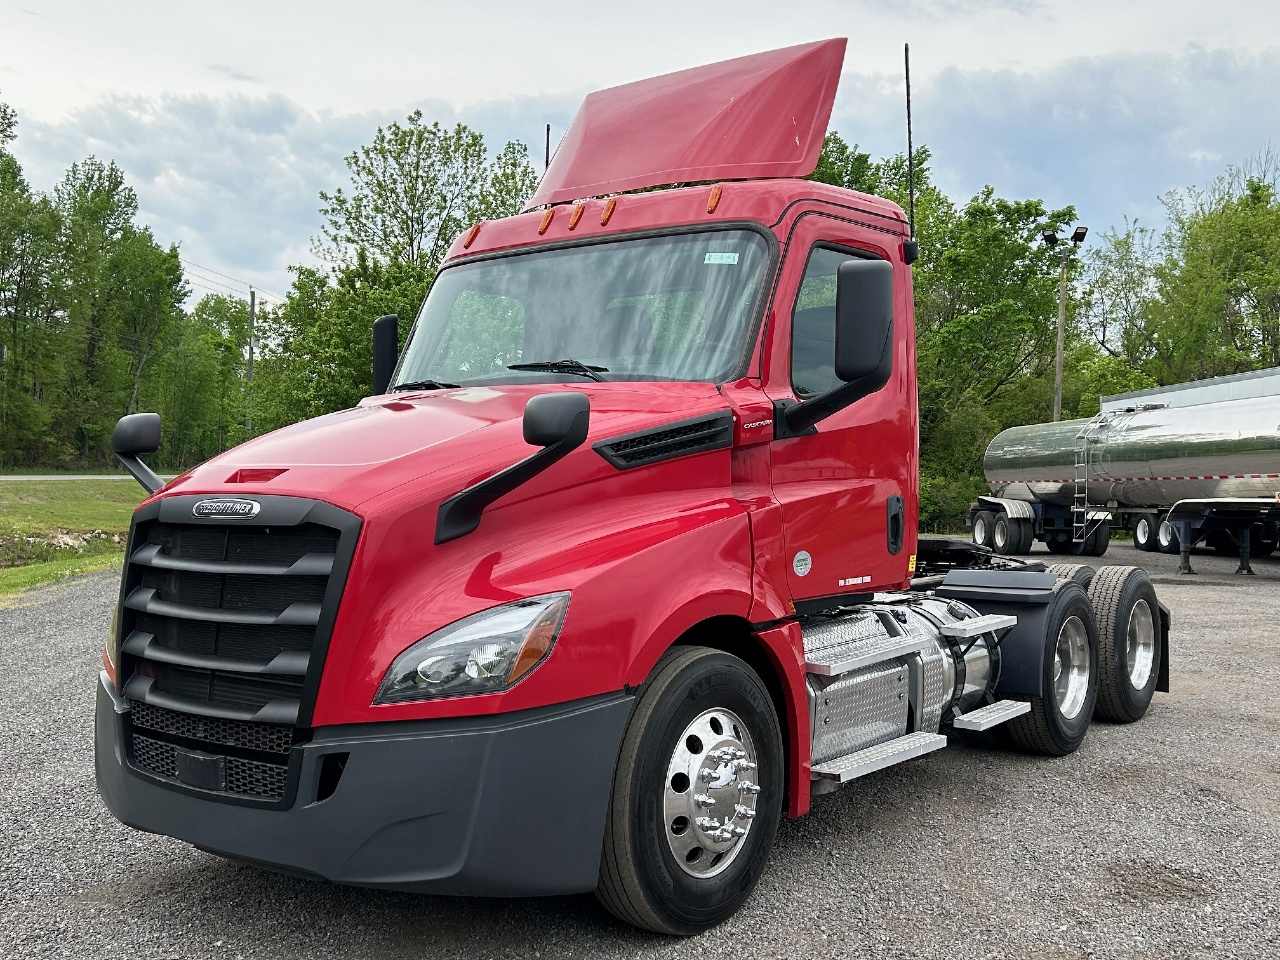 USED 2018 FREIGHTLINER CASCADIA TANDEM AXLE DAYCAB TRUCK #15295